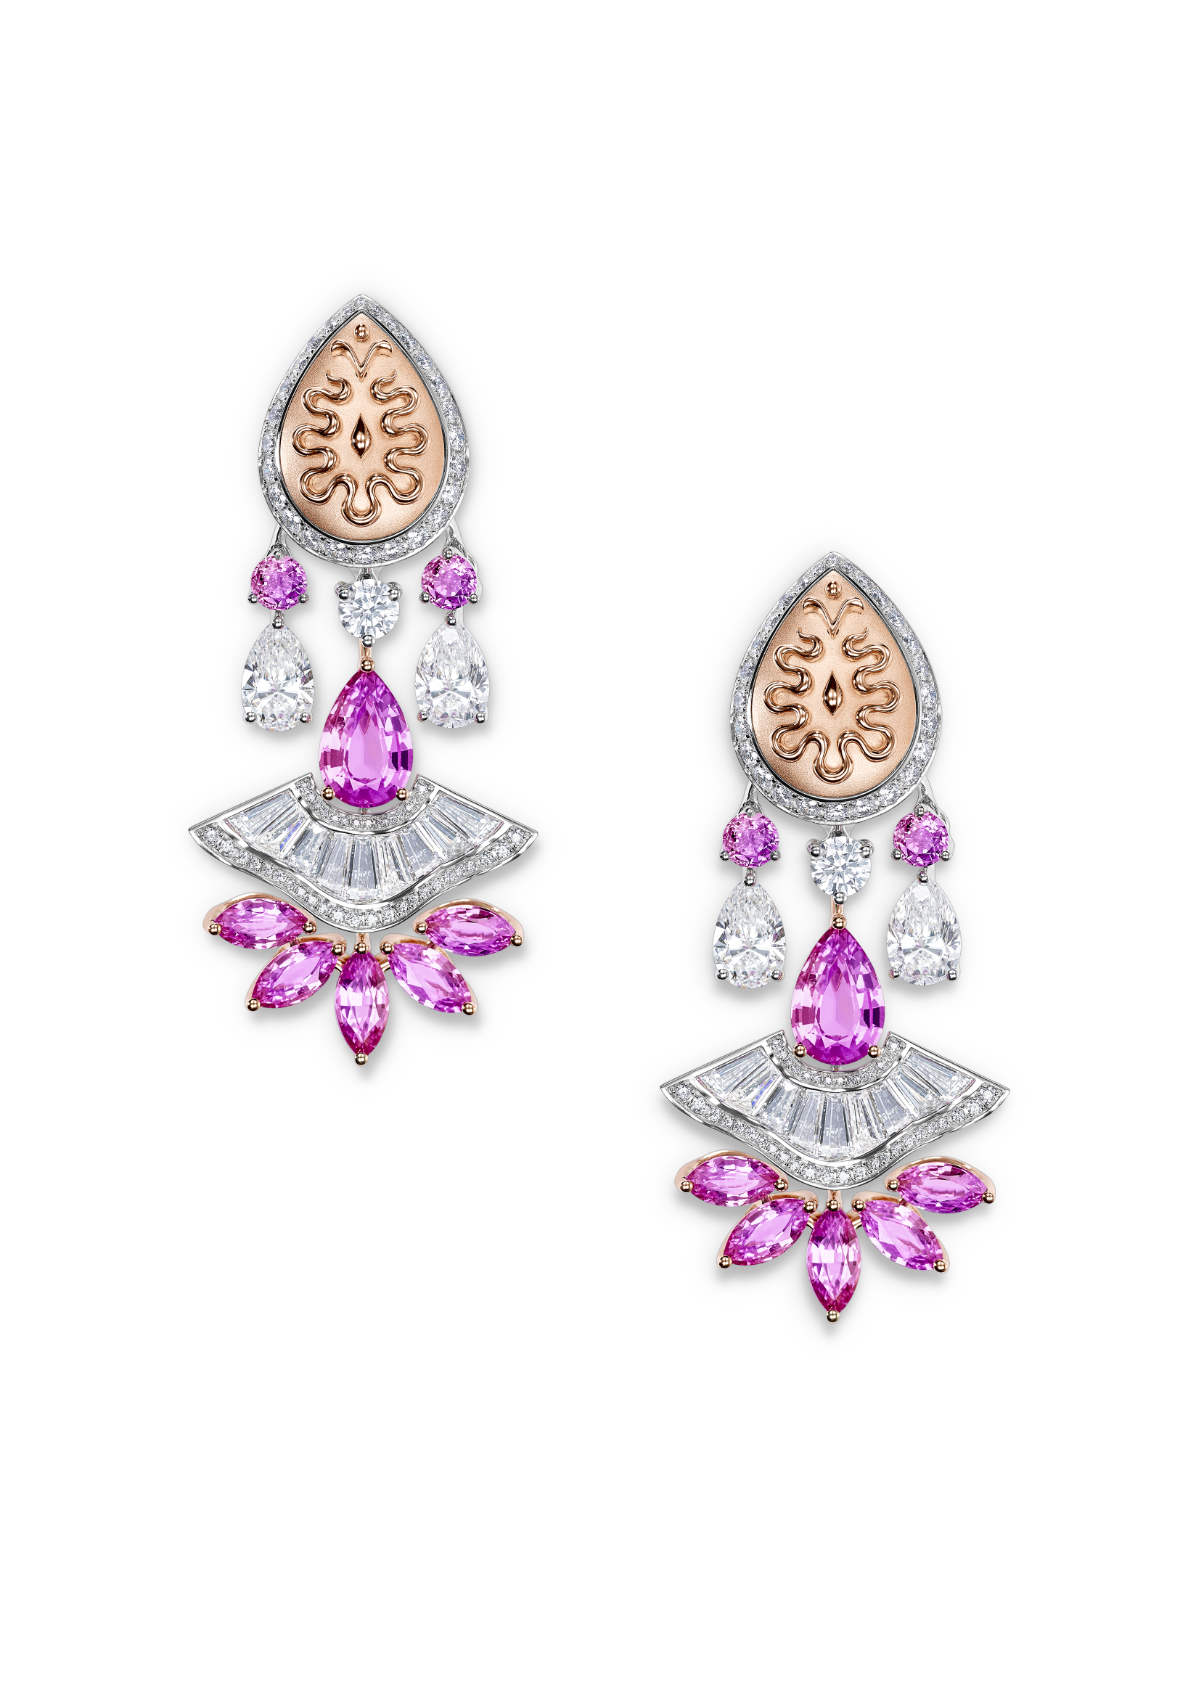 Chopard's Exceptional Stones